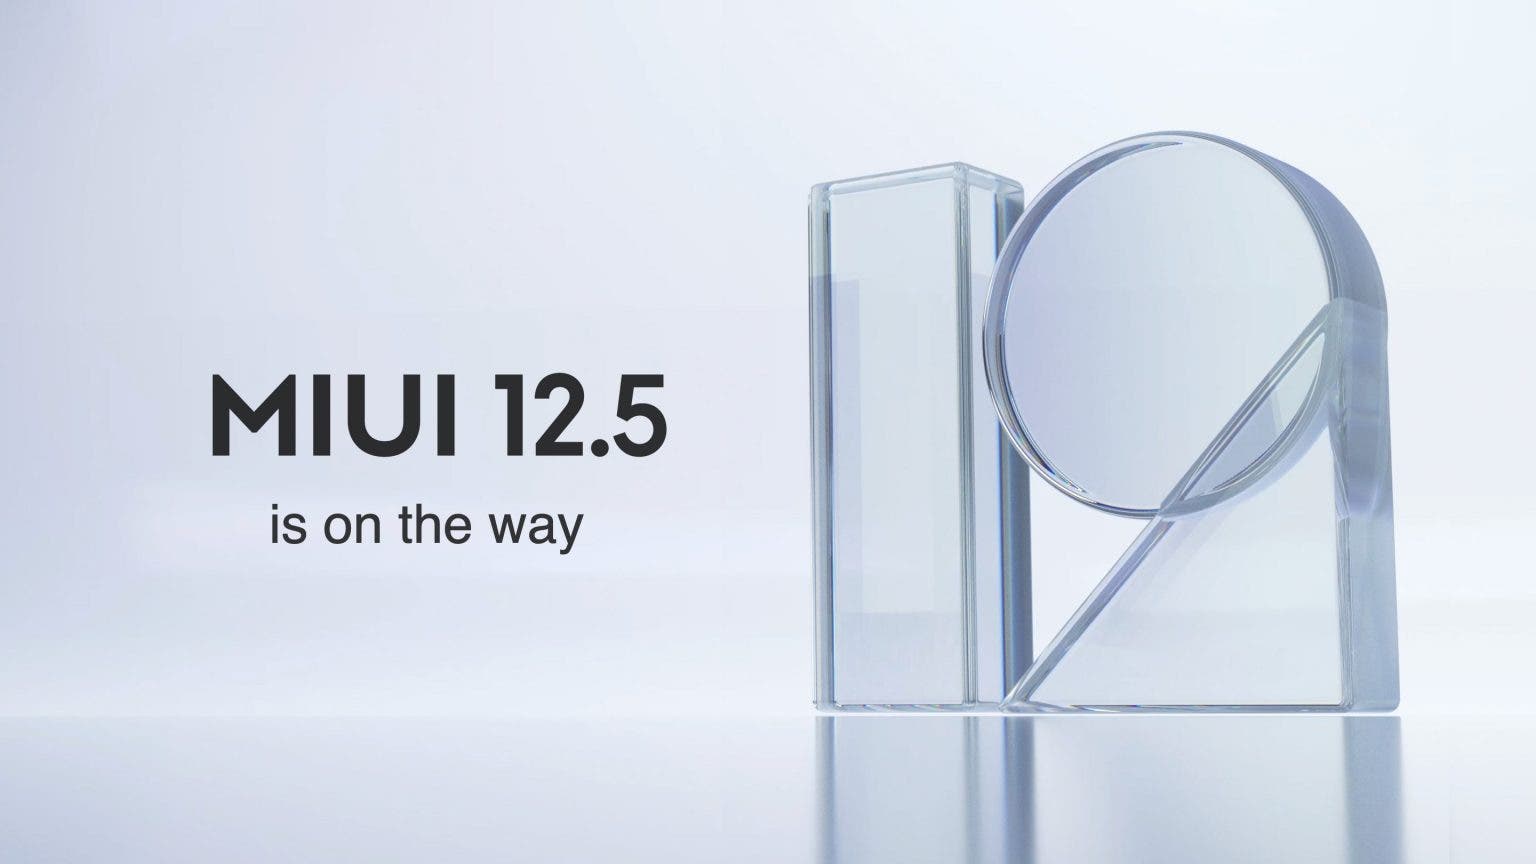 Xiaomi introduces MIUI 12.5 global version; First wave to commence in Q2 2021